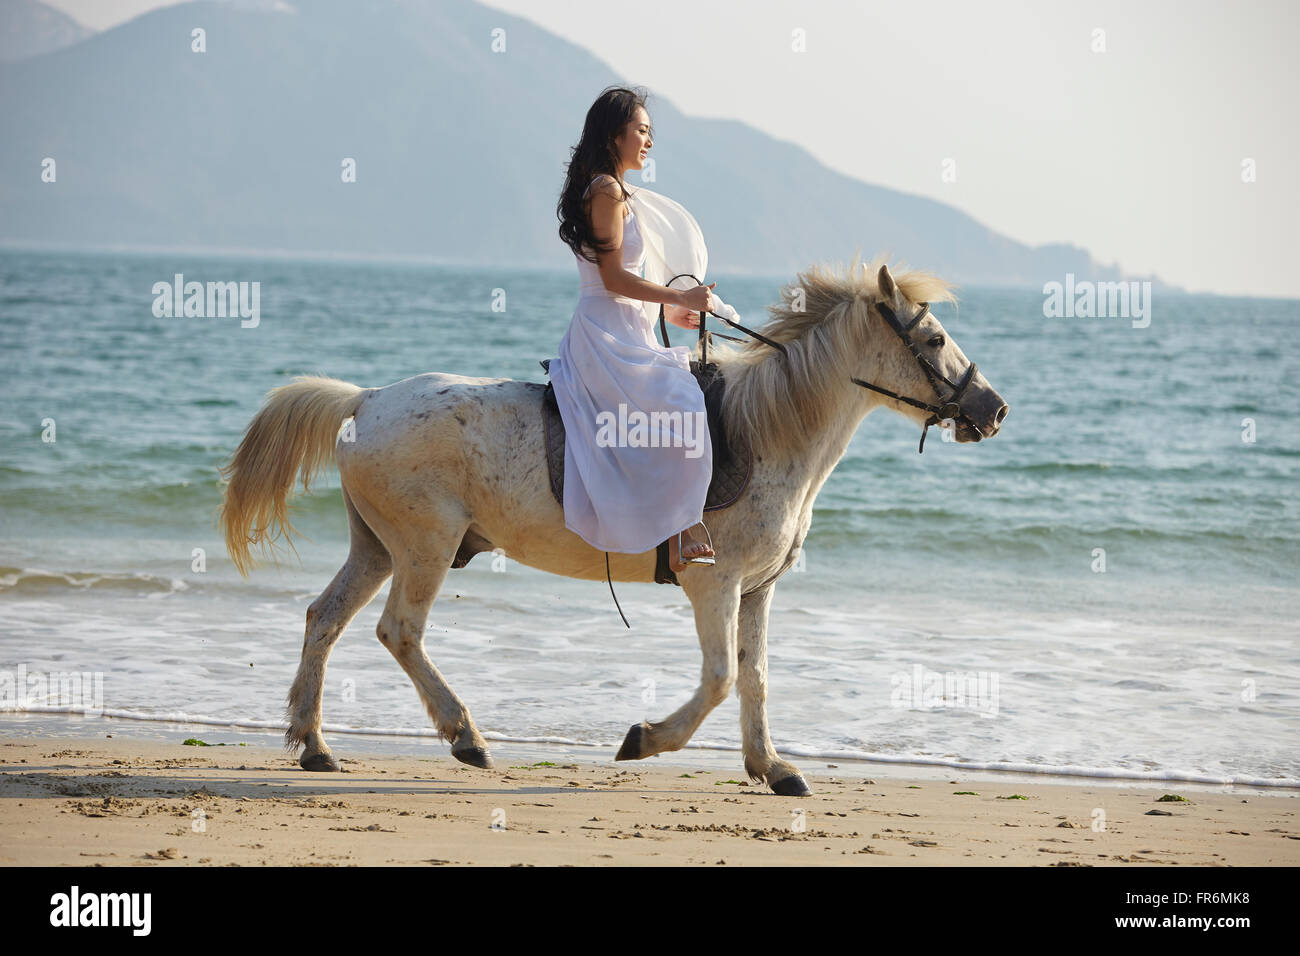 a Chinese young woman riding horse on beach Stock Photo